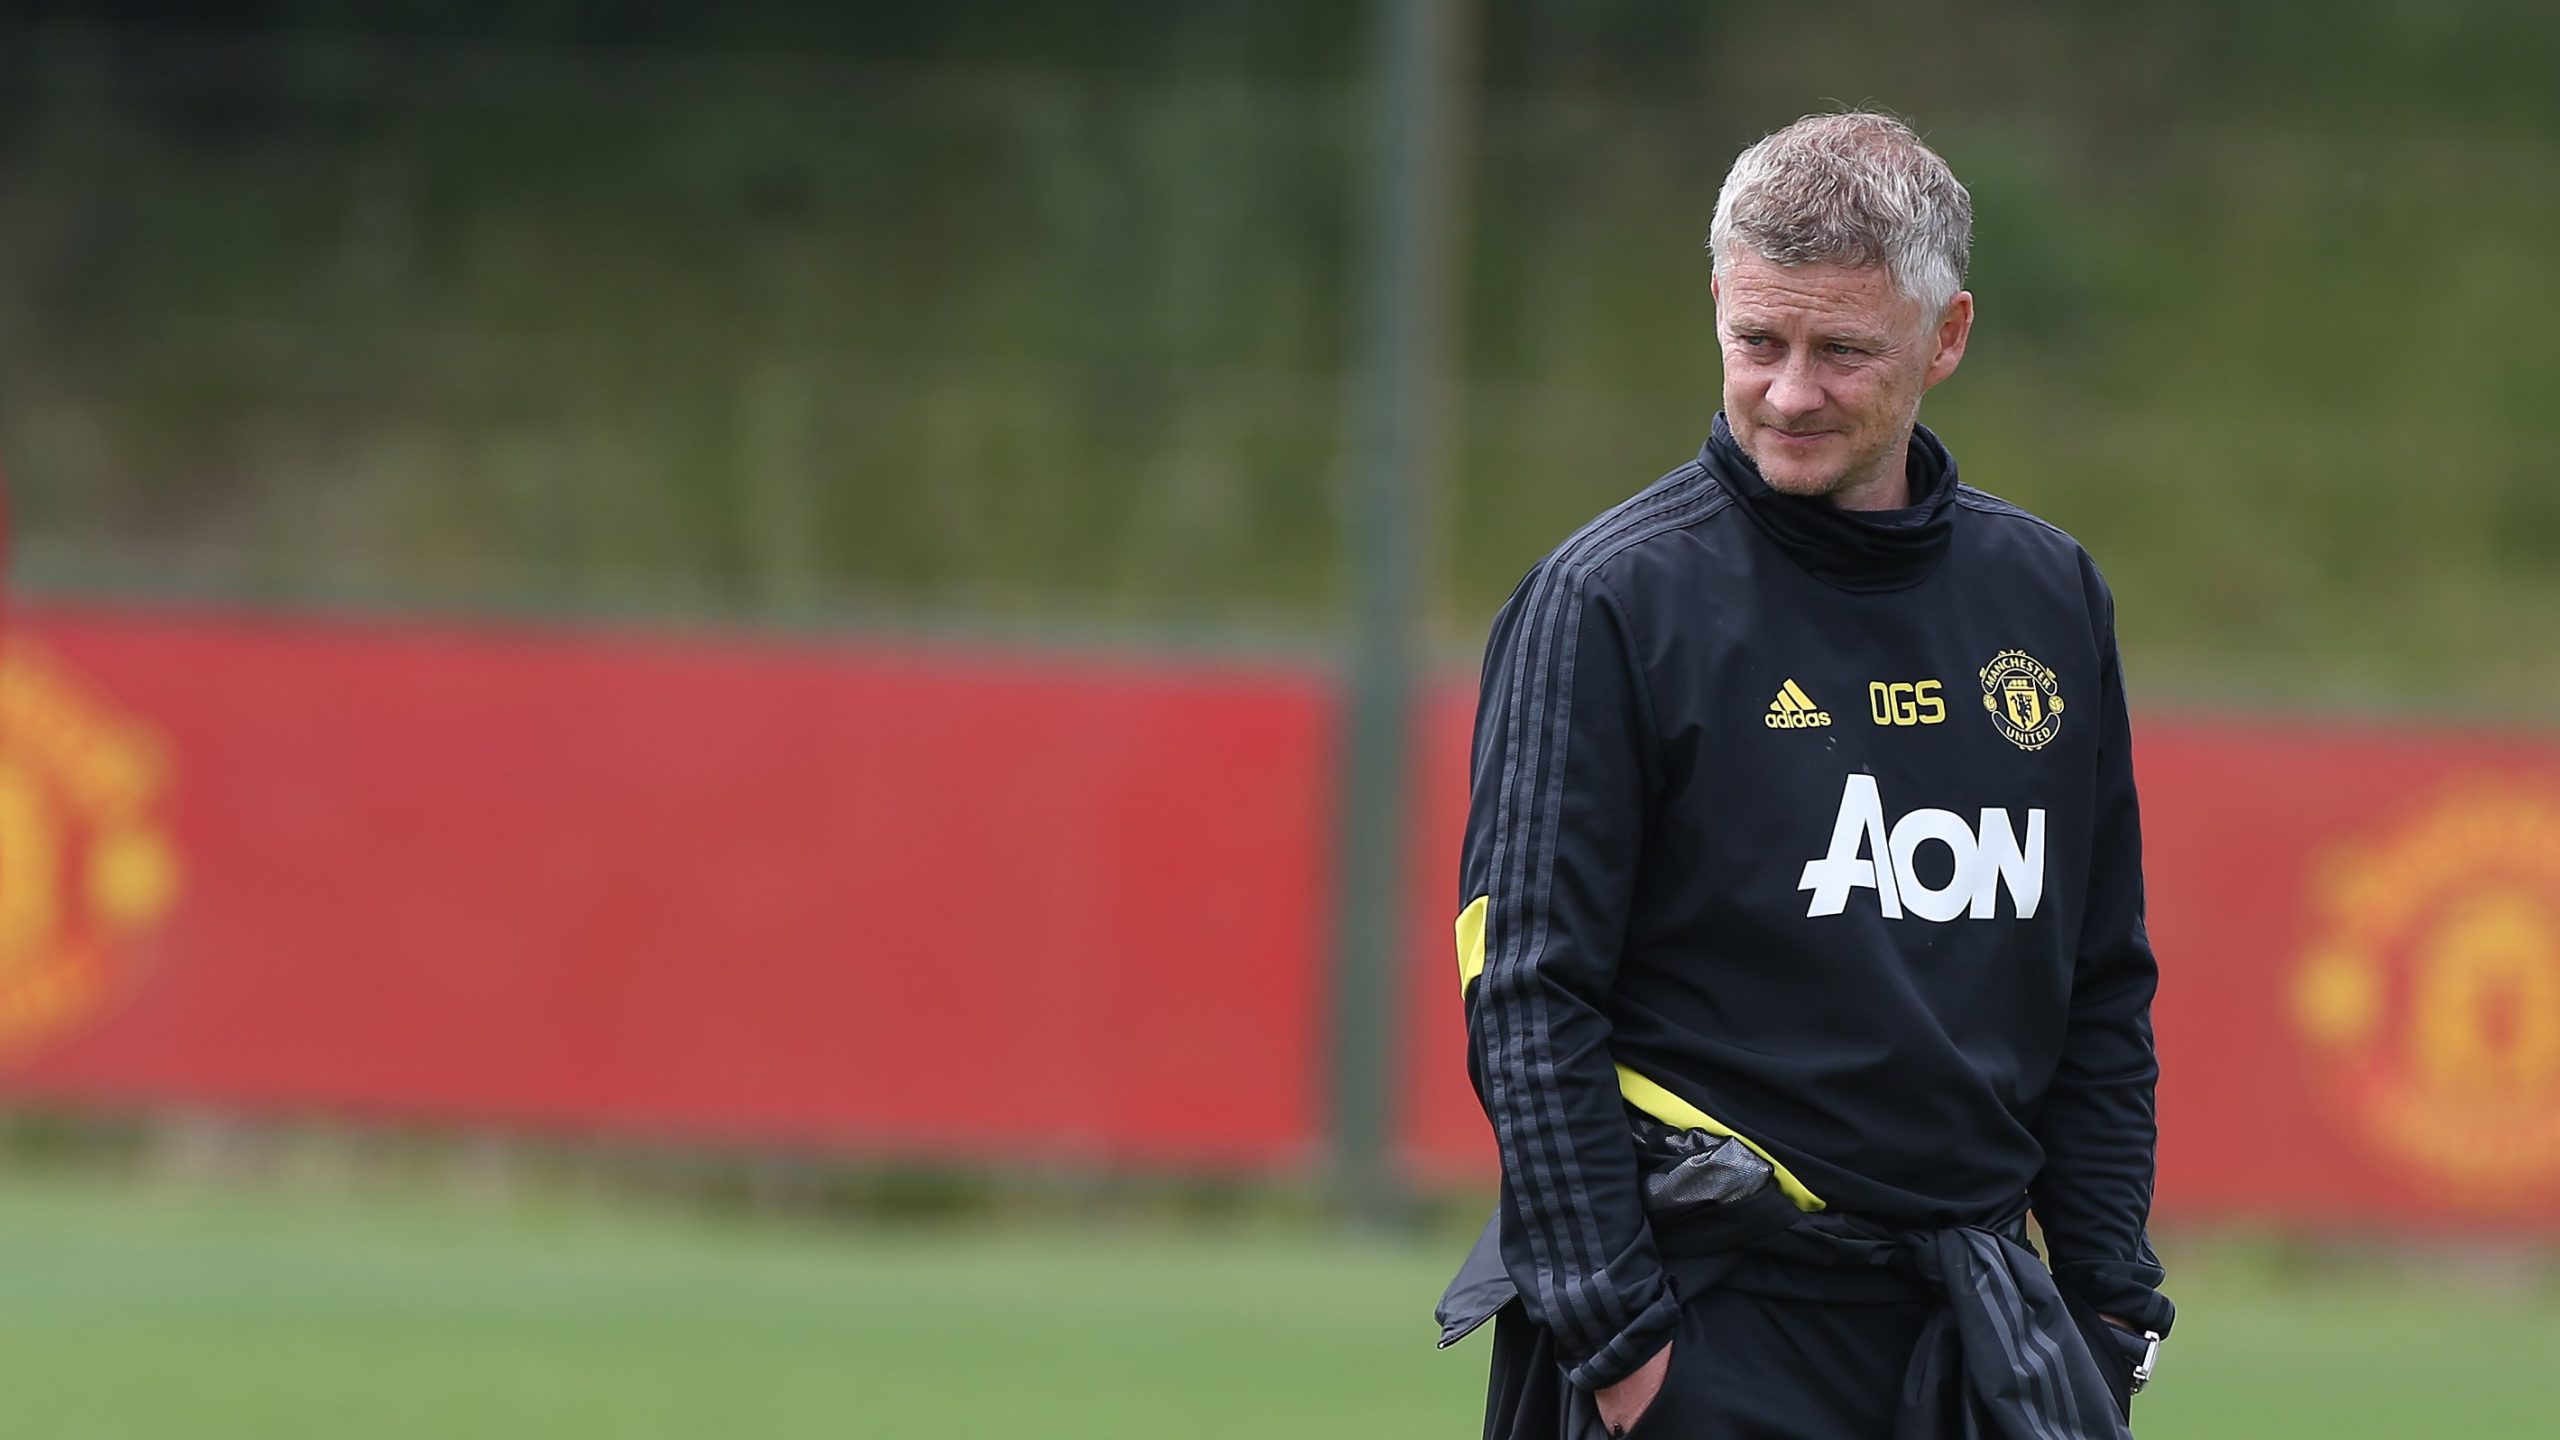 Will Manchester United replace Ole Gunnar Solskjaer? (Getty Images)